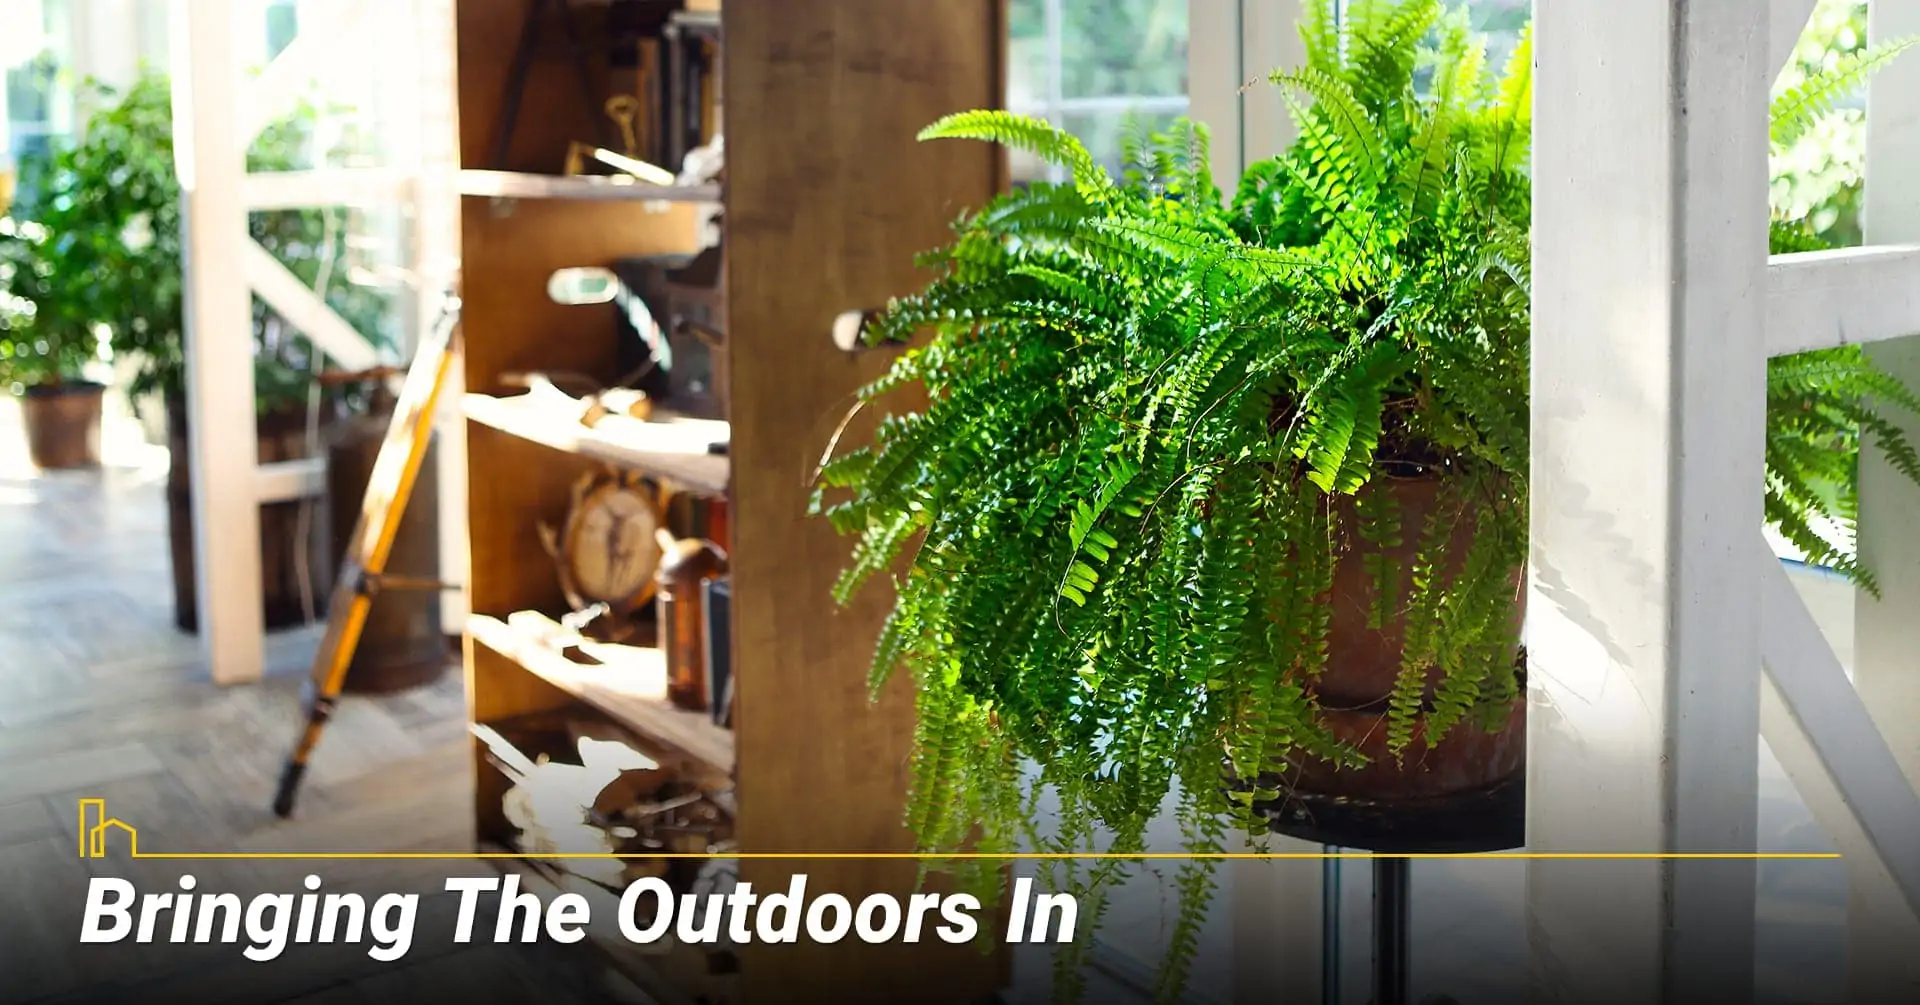 Bringing The Outdoors In, add some plants